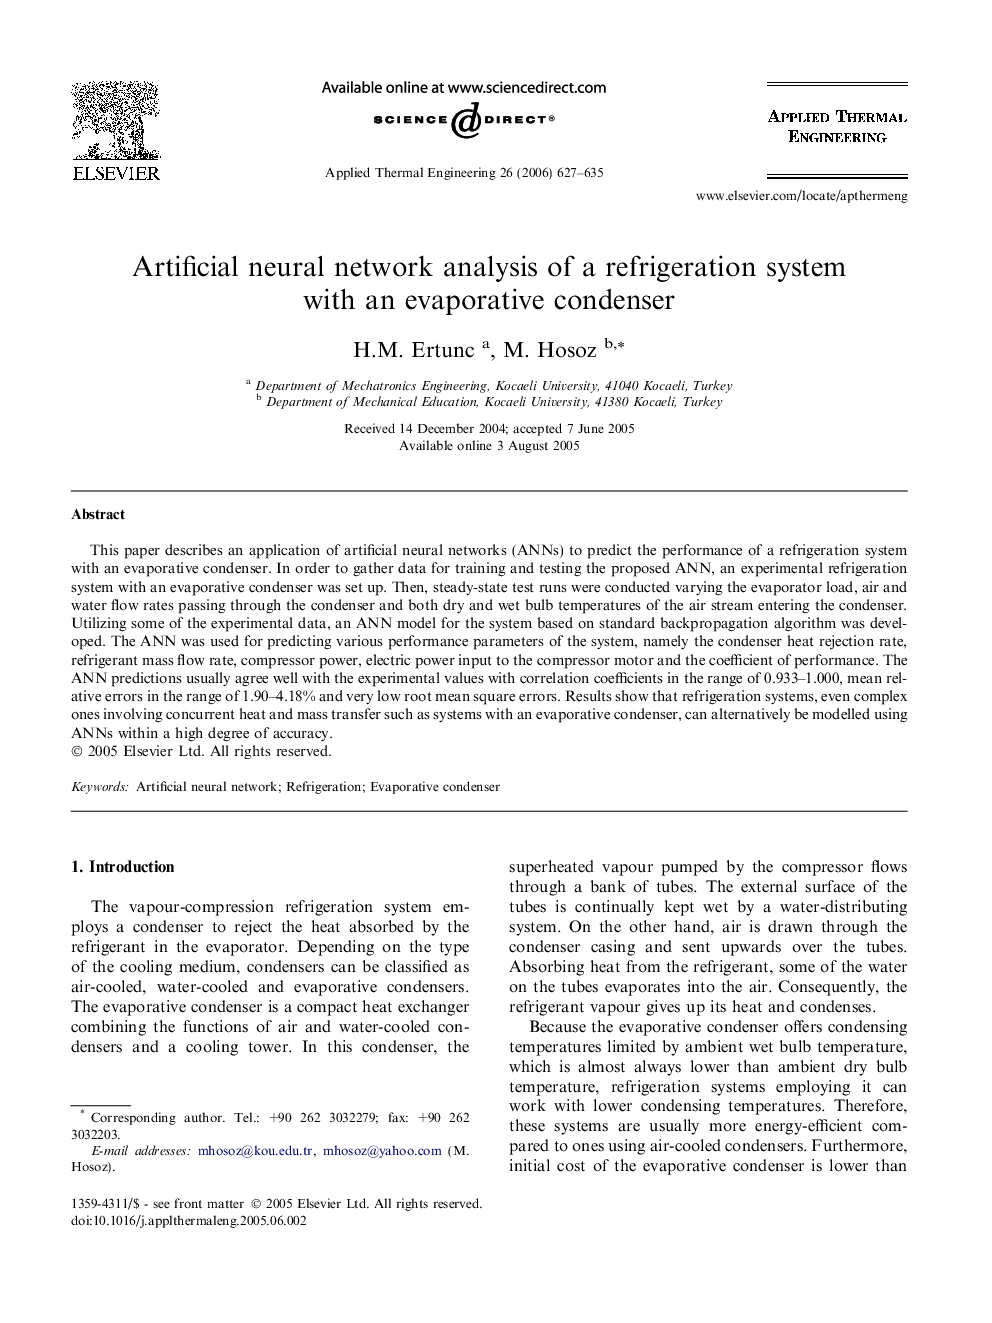 Artificial neural network analysis of a refrigeration system with an evaporative condenser